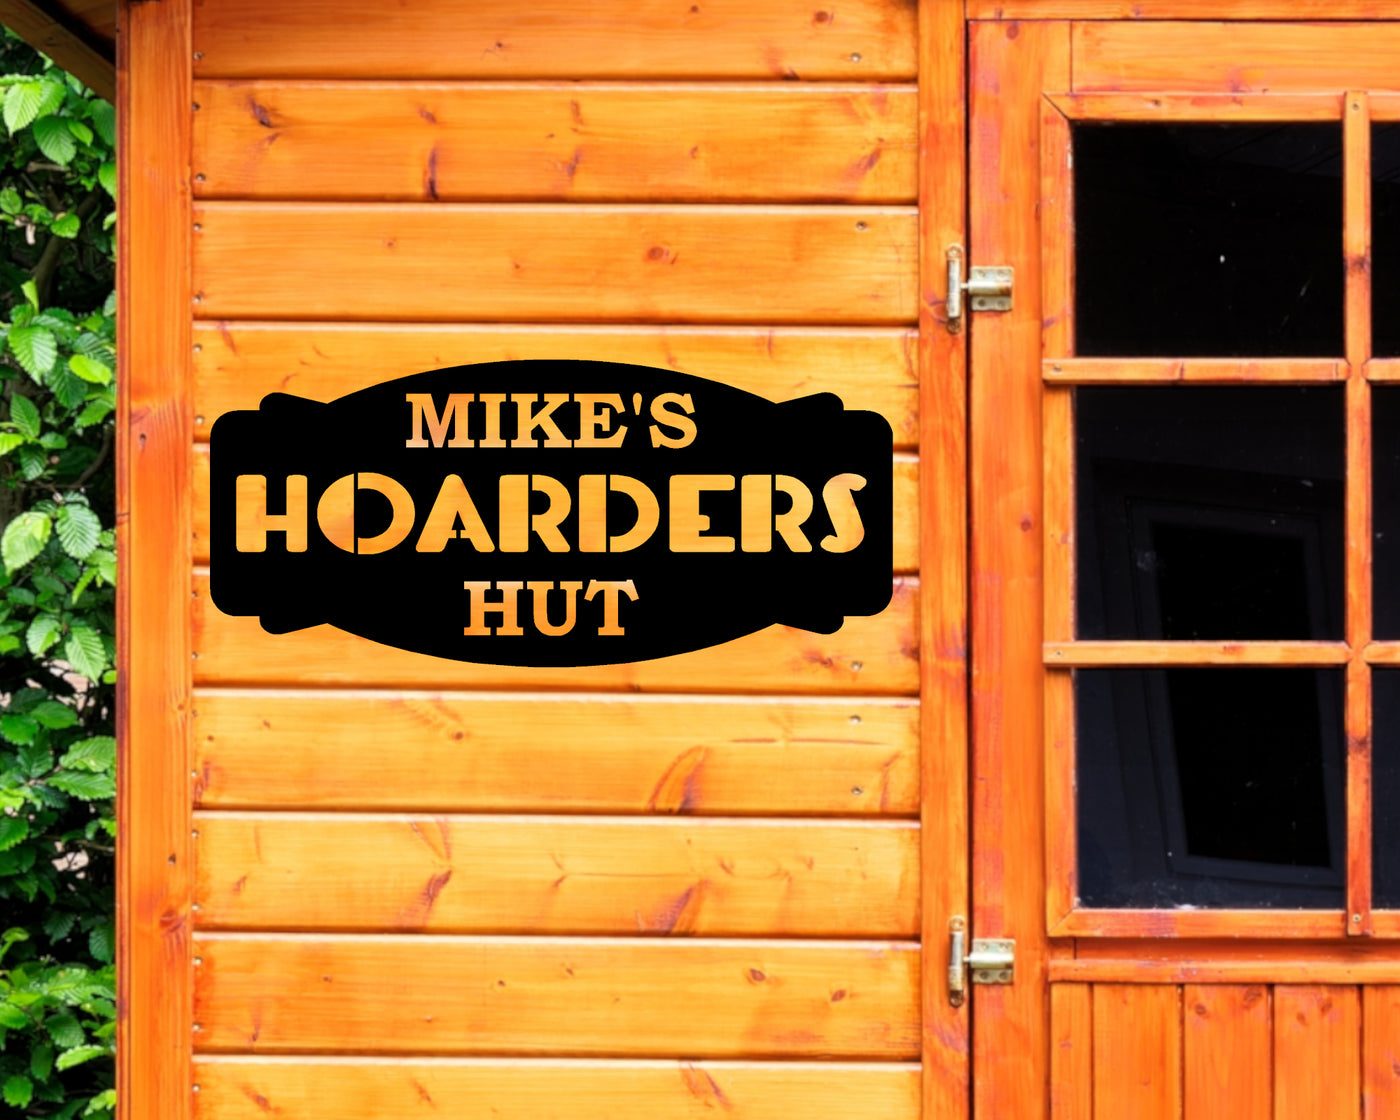 Hoarders Hut Personalized Metal Sign